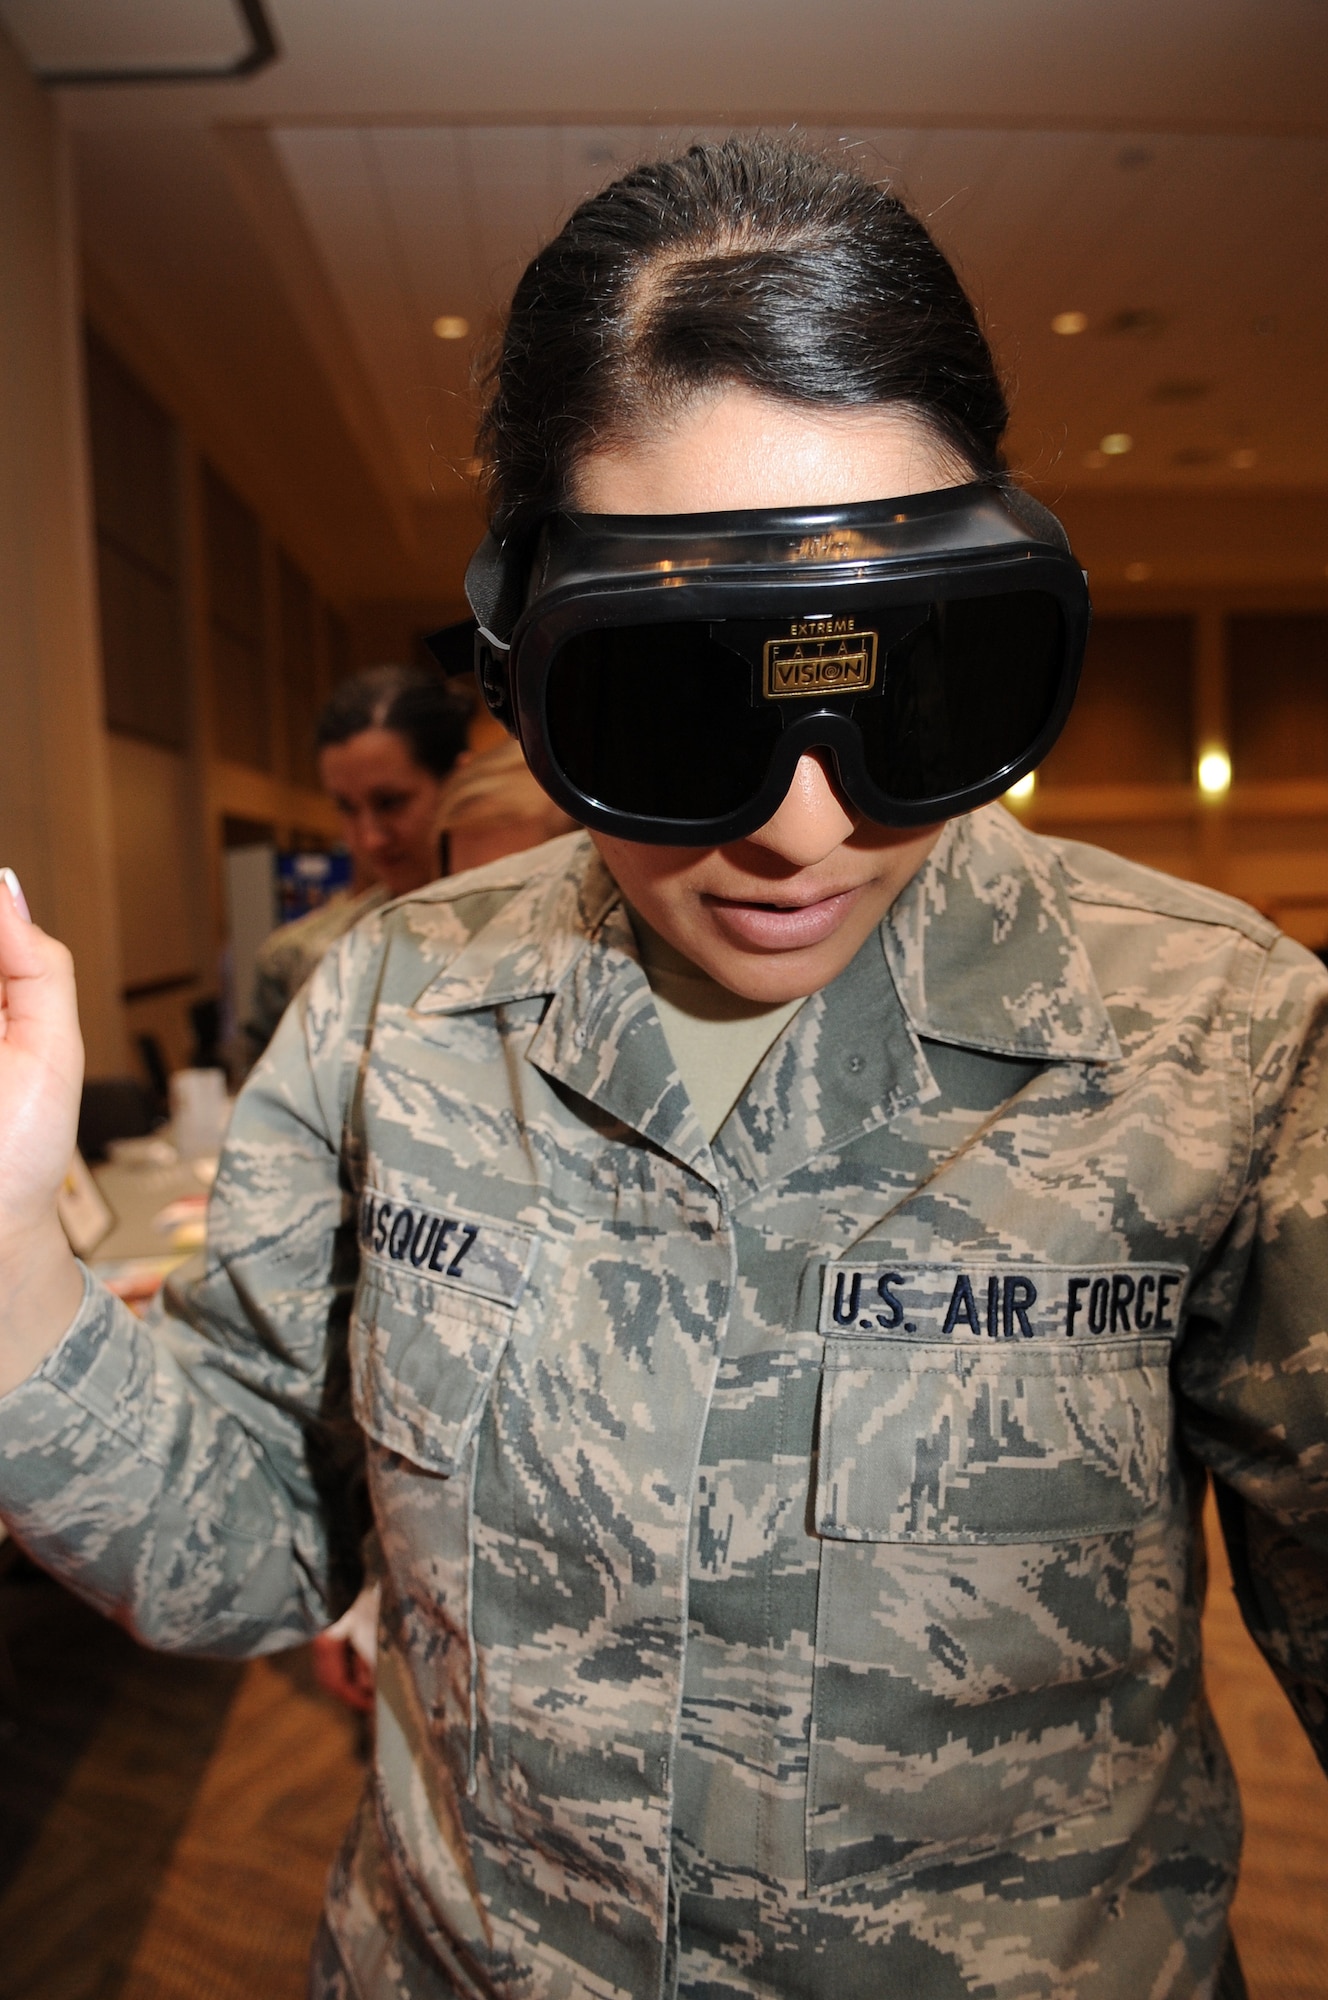 BUCKLEY AIR FORCE BASE, Colo.-- Airman 1st Class Manisha Vasquez, 460th Space Wing, views the world through a pair of simulated " beer goggles", May 20. The beer goggles distort your perception and make it very difficult to see and walk and gives you a view of the world while under the effects of alcohol. Several of these perception-altering devices were made available during the Save- a- Life Tour hosted by Team Buckley. ( U.S. Air Force Photo by Airman 1st Class Marcy Glass )


